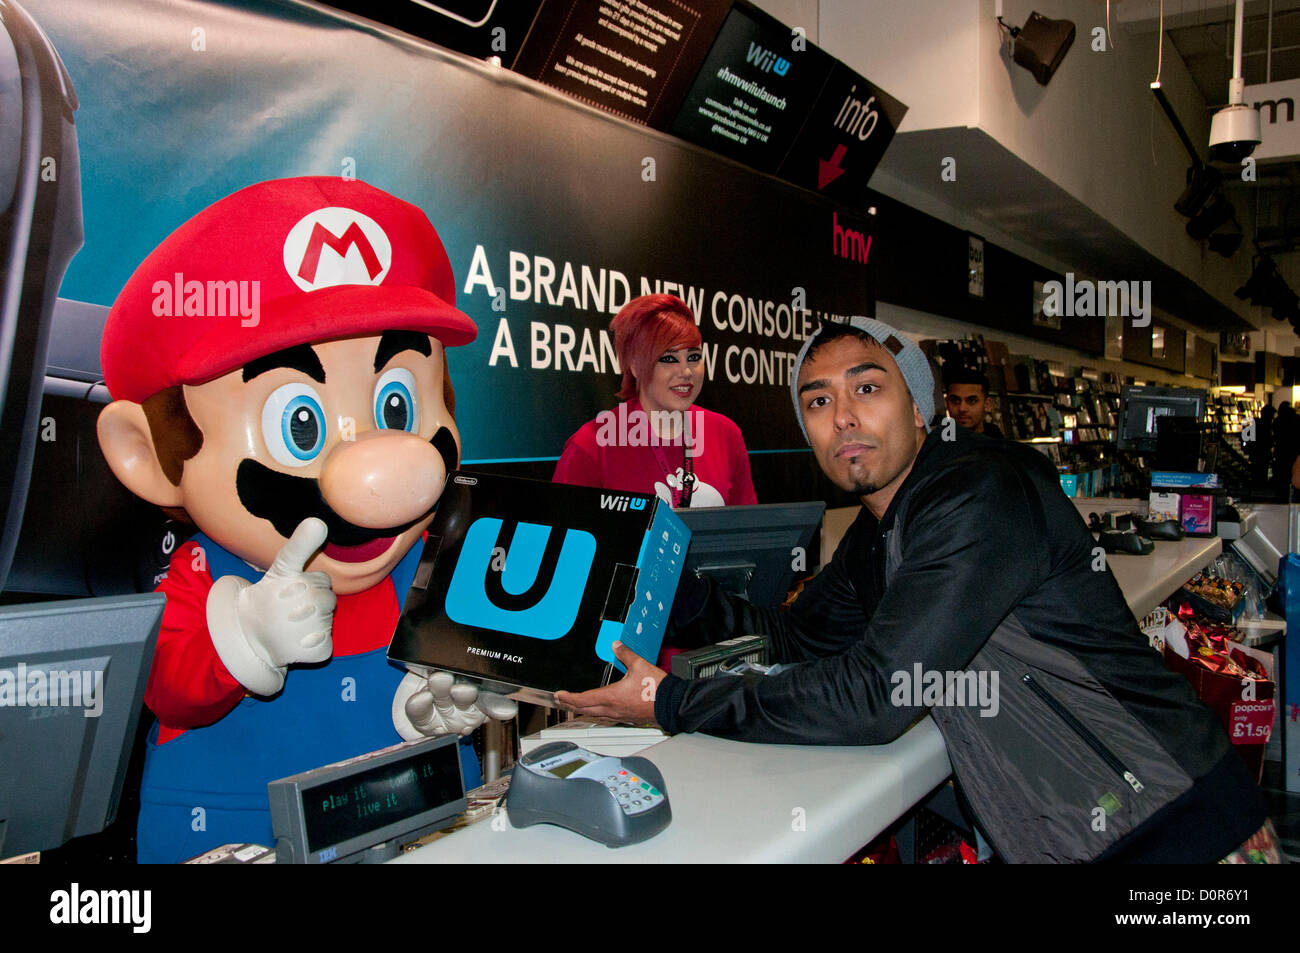 London, UK. 30/11/12. Izzy Rahmam is the first gamer to his hands on the brand new games console, the Nintendo Wii U. Izzy has been camping outside HMV's flafship store on